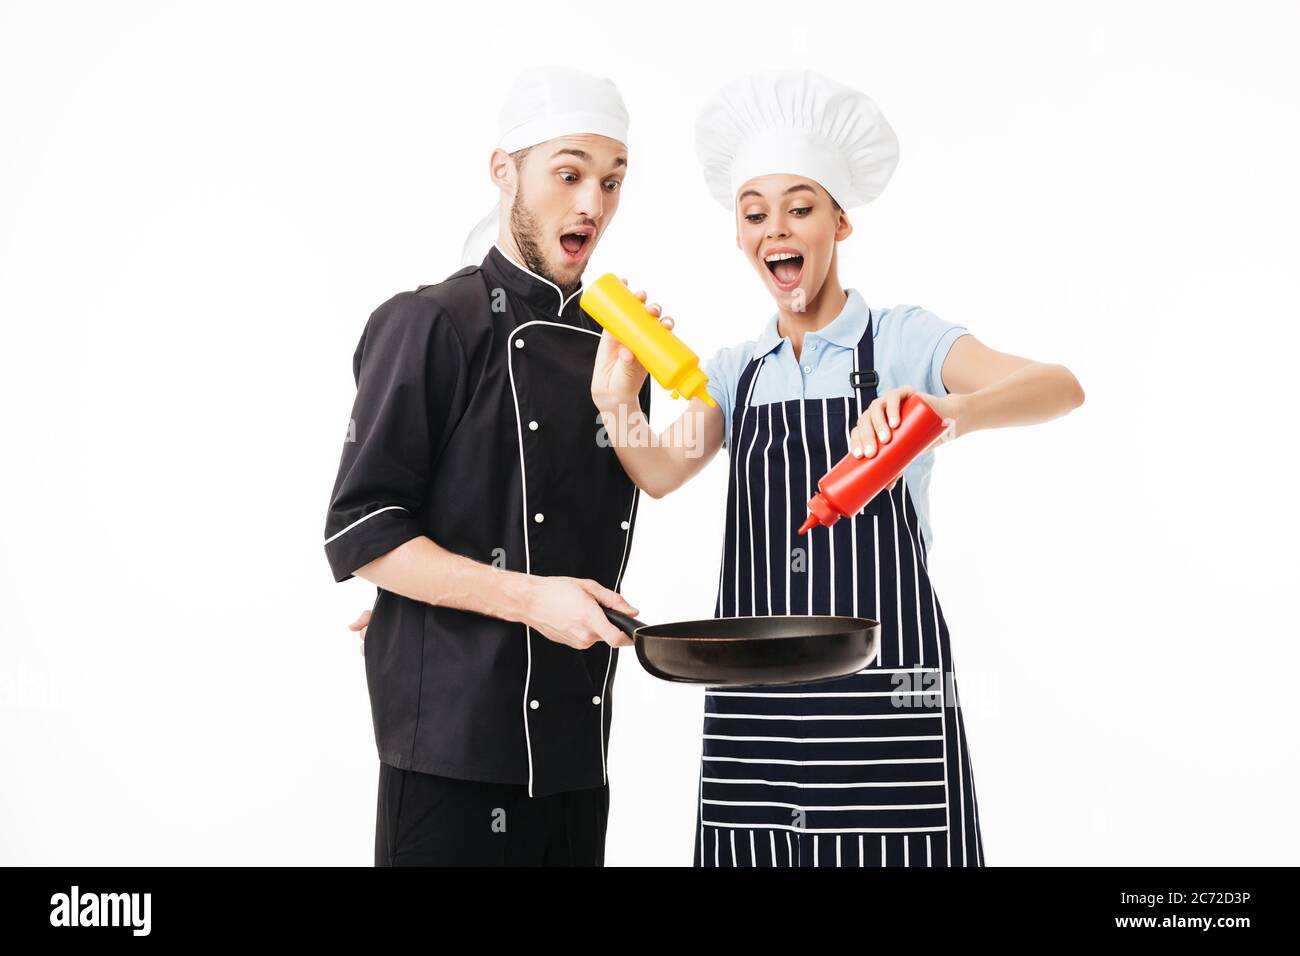 Young shocked man chef in black uniform, holding pan in hands while woman cook in striped apron using bottles of ketchup and mustard on it over white Stock Photo